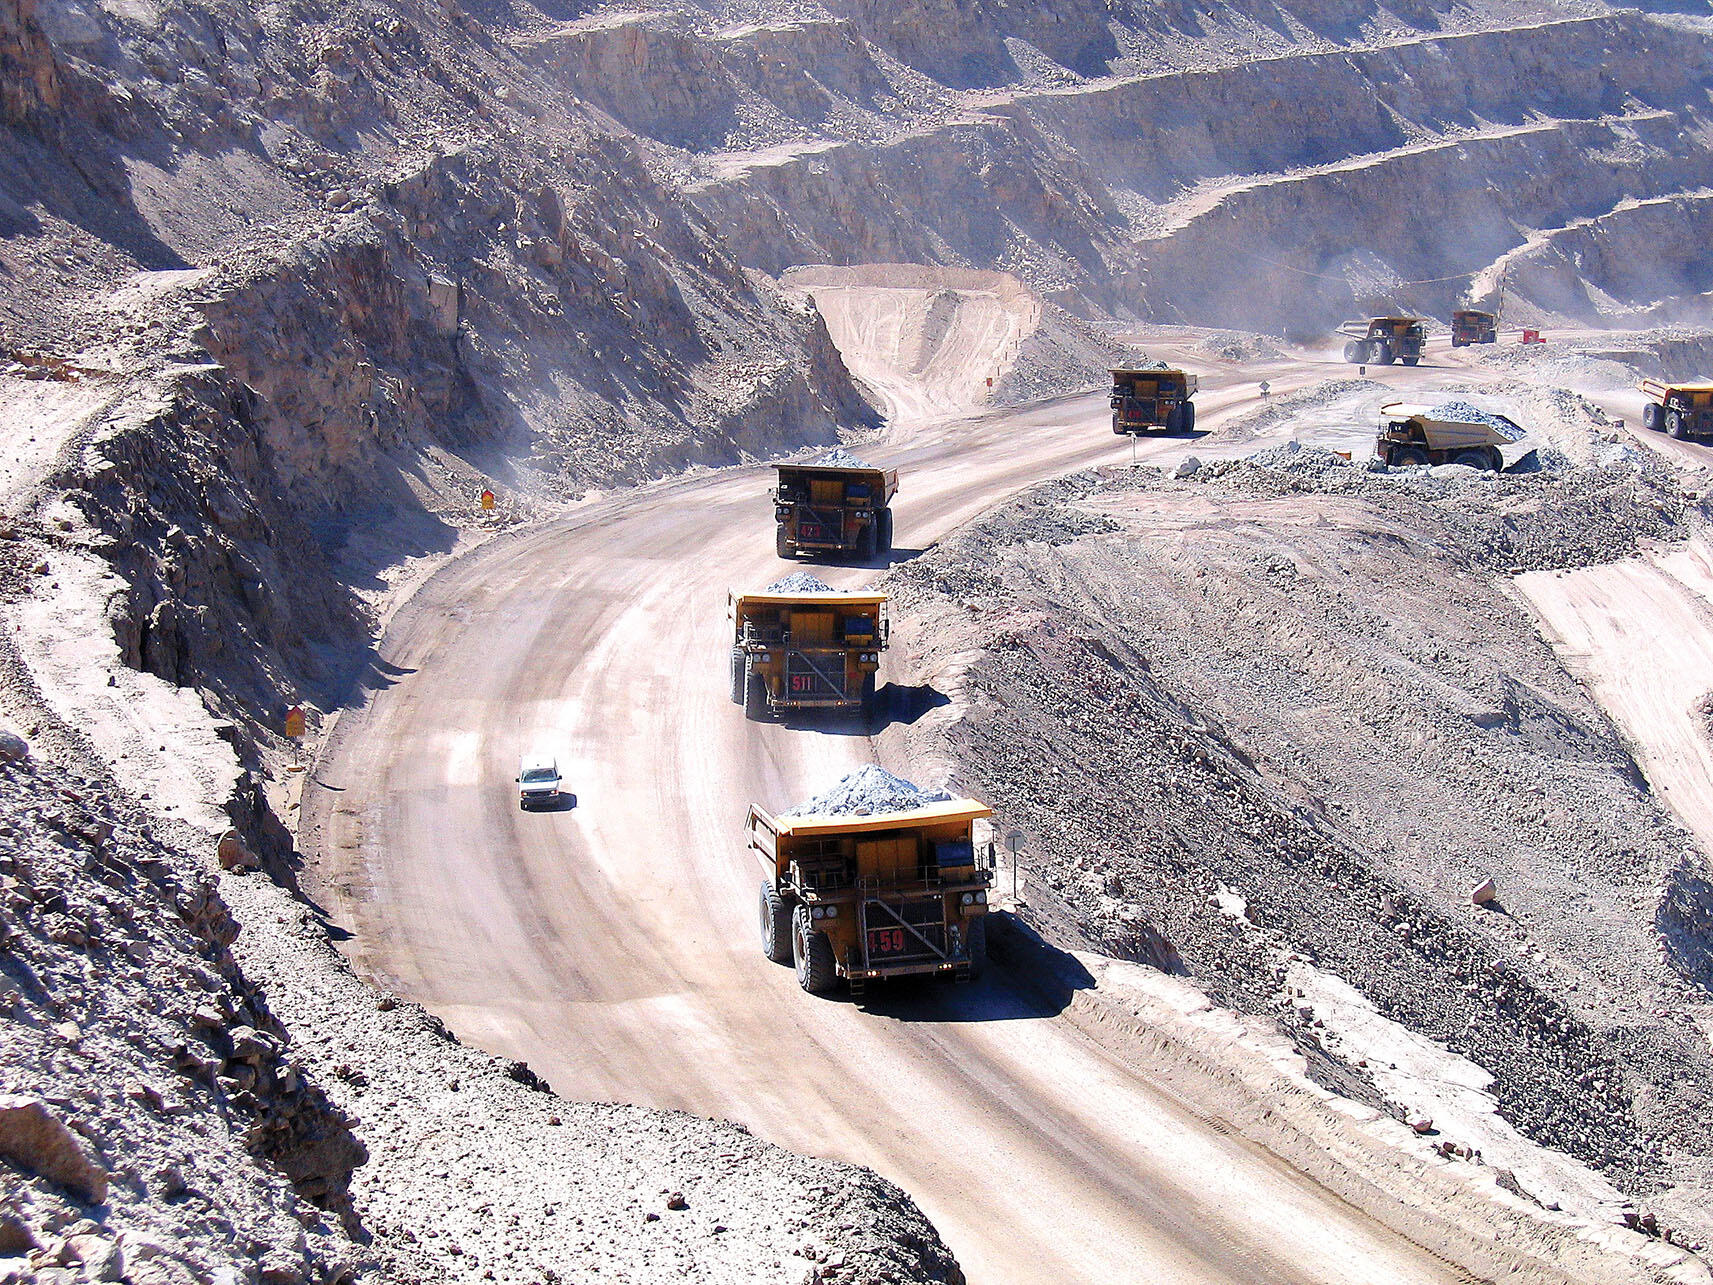 Large dumptrucks full of raw ore trundle up the dusty ramps of Chile’s Chuquicamata copper mine. (Photo by Magnus von Koeller.)